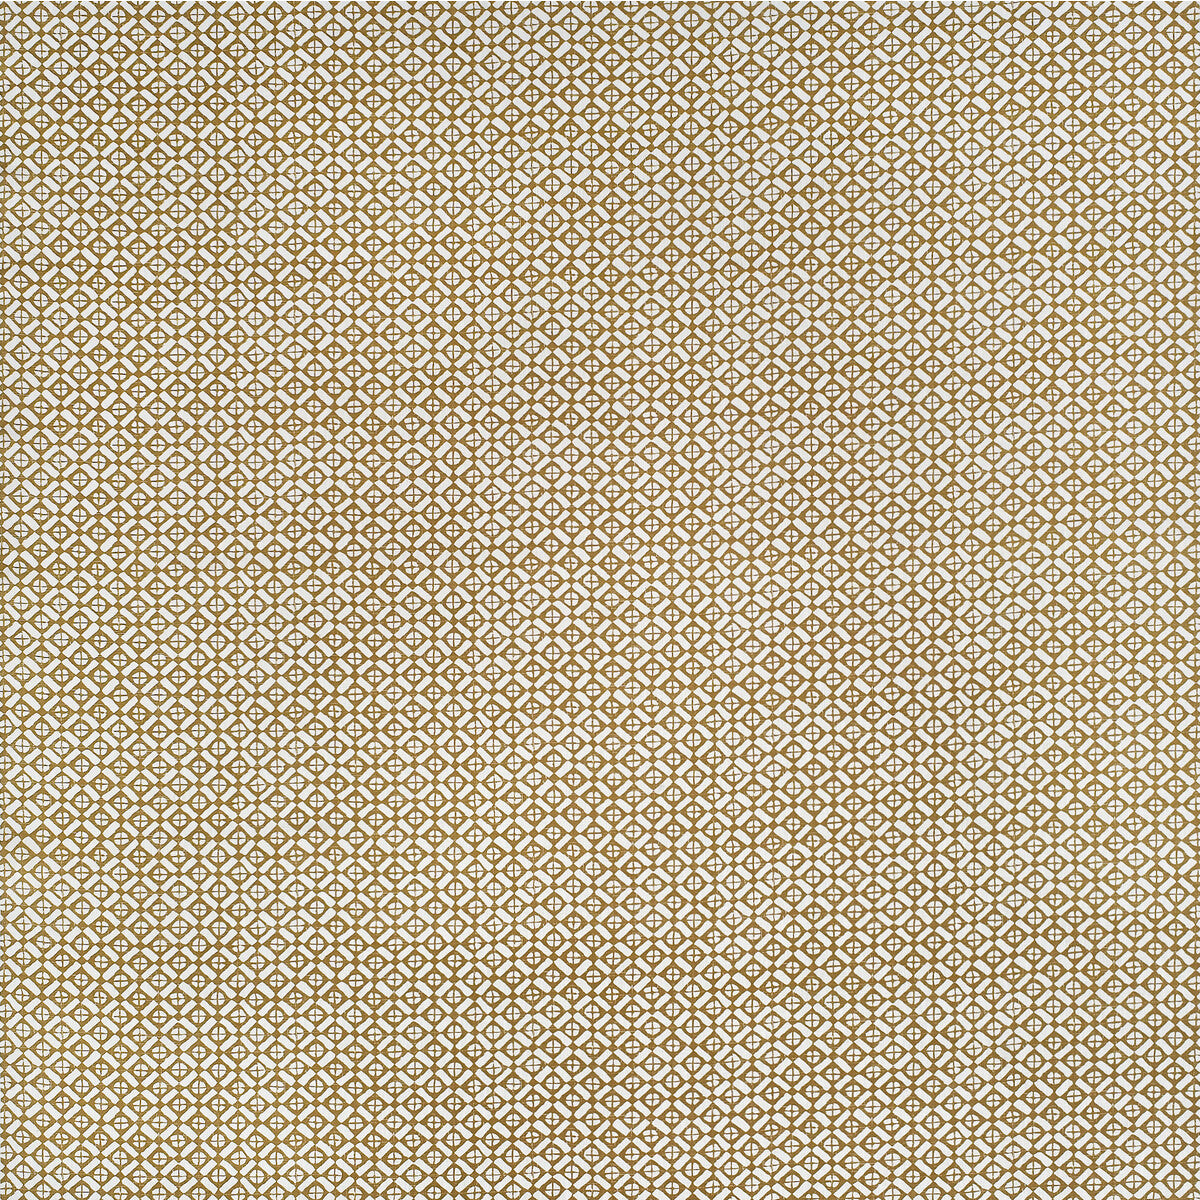 Audley Outdoor fabric in ochre color - pattern AM100386.4.0 - by Kravet Couture in the Andrew Martin Sophie Patterson Outdoor collection